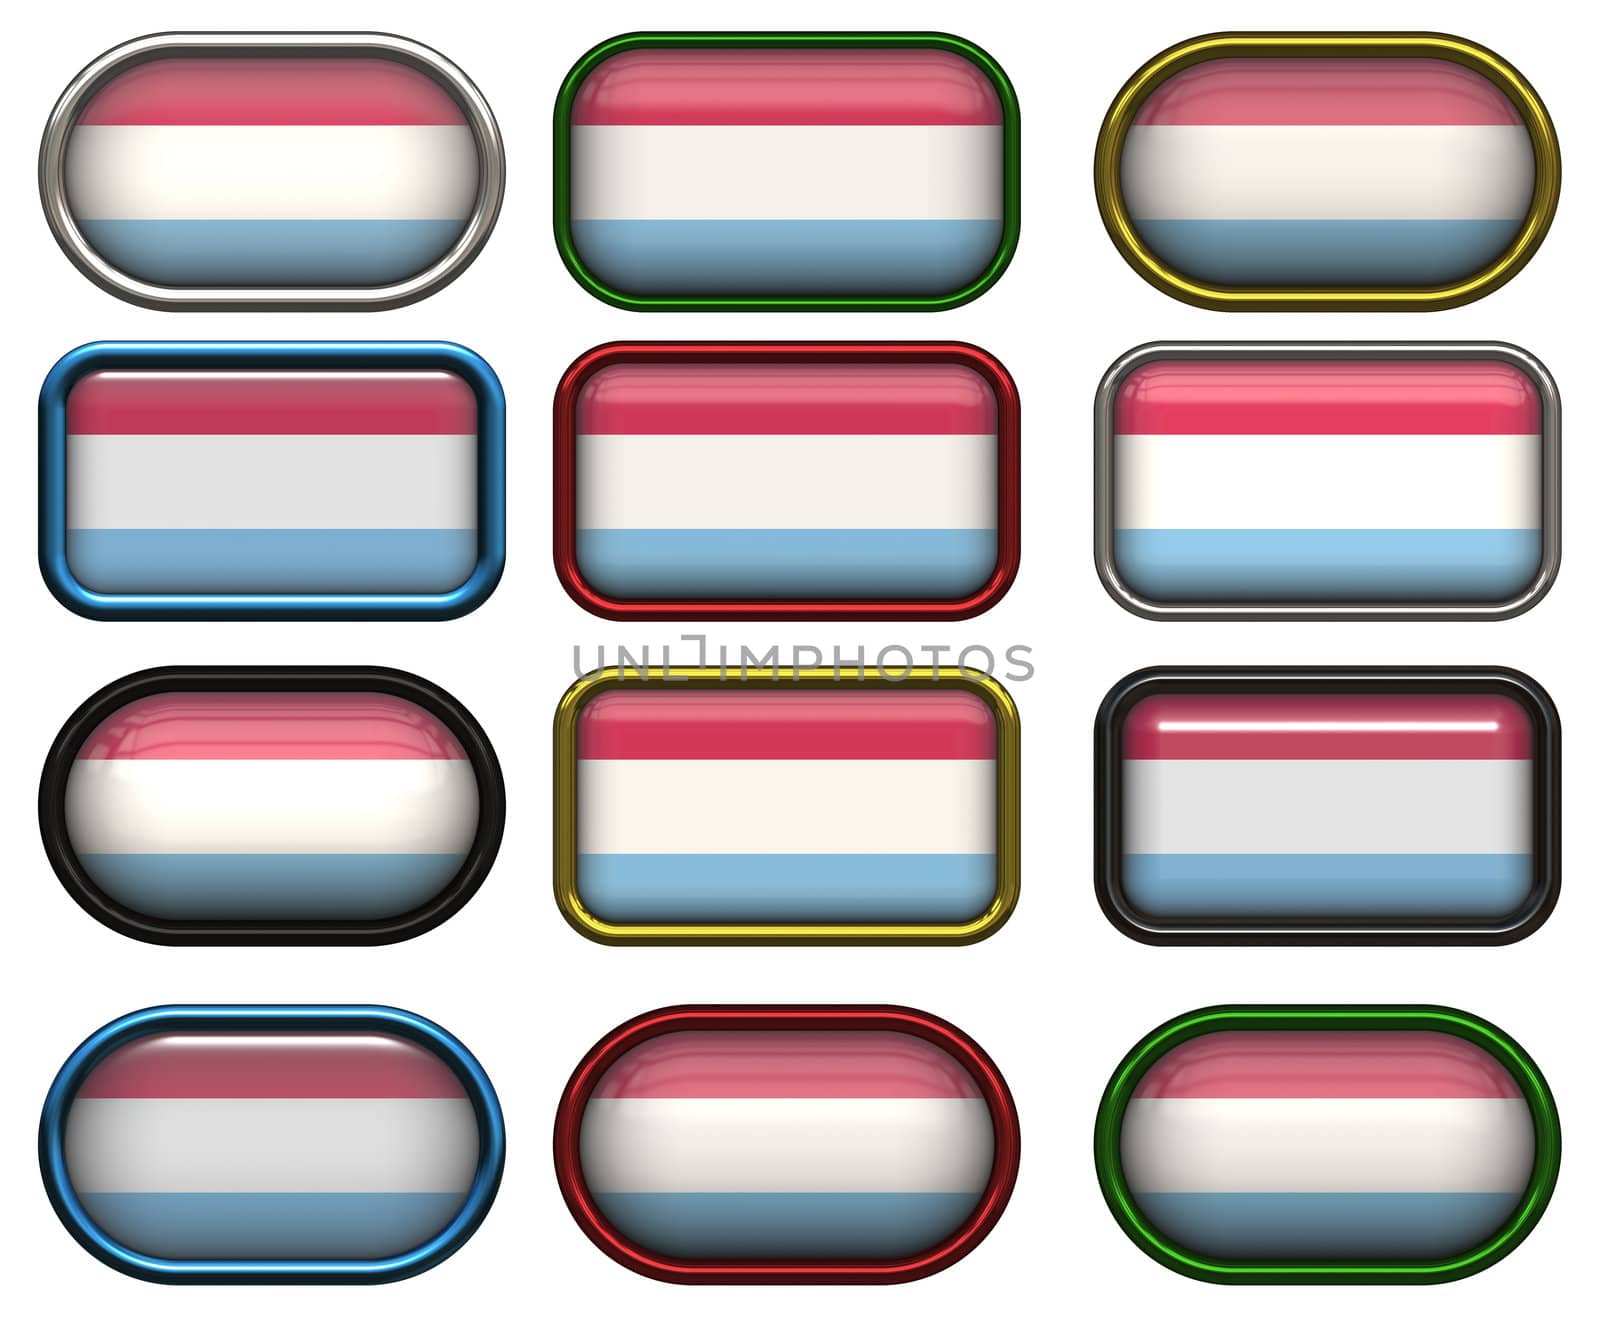 twelve Great buttons of the Flag of Luxembourg